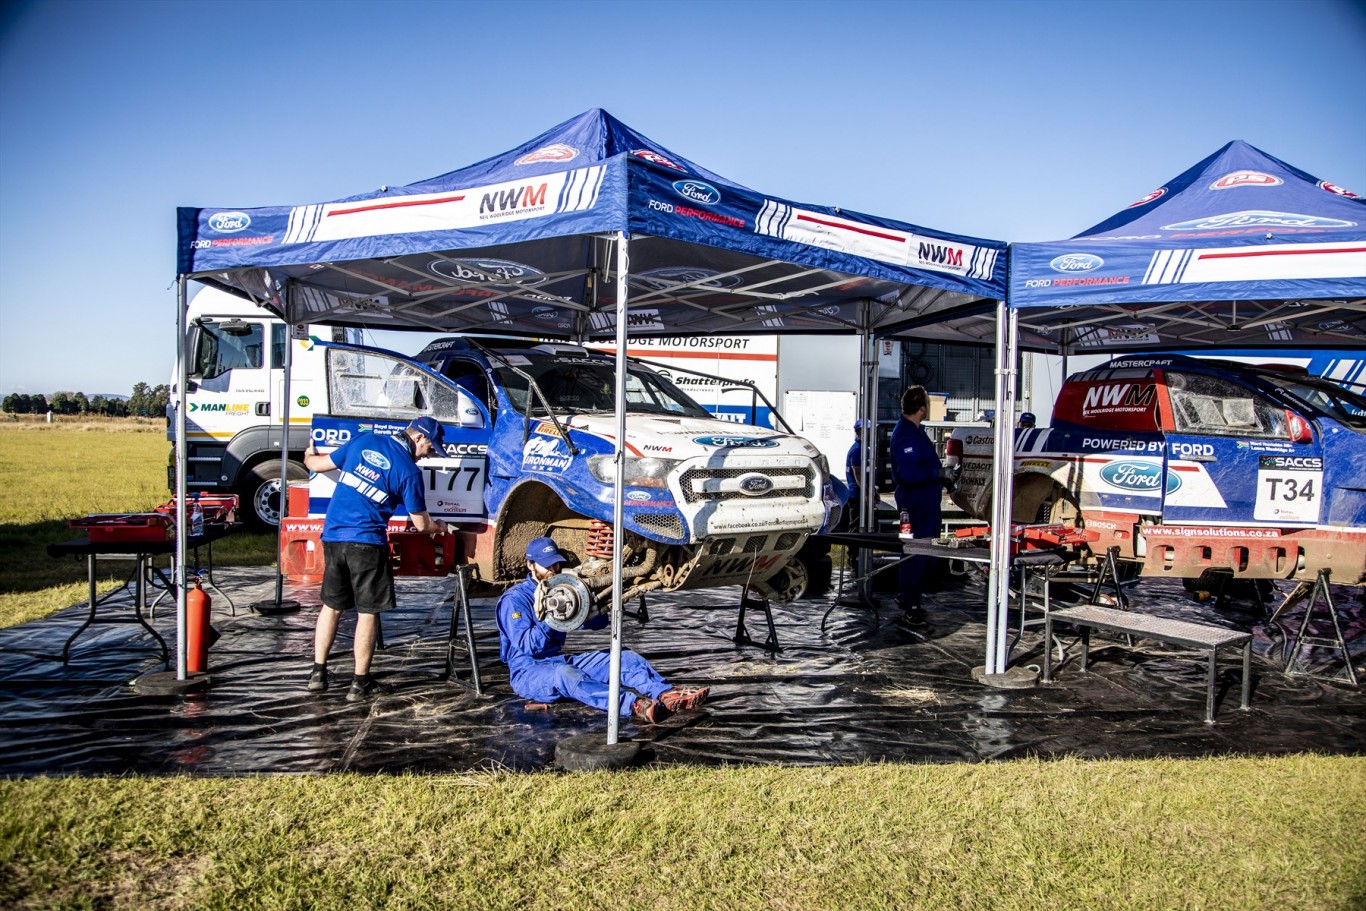 Second win on the trot for Ford NWM on Battlefields 400